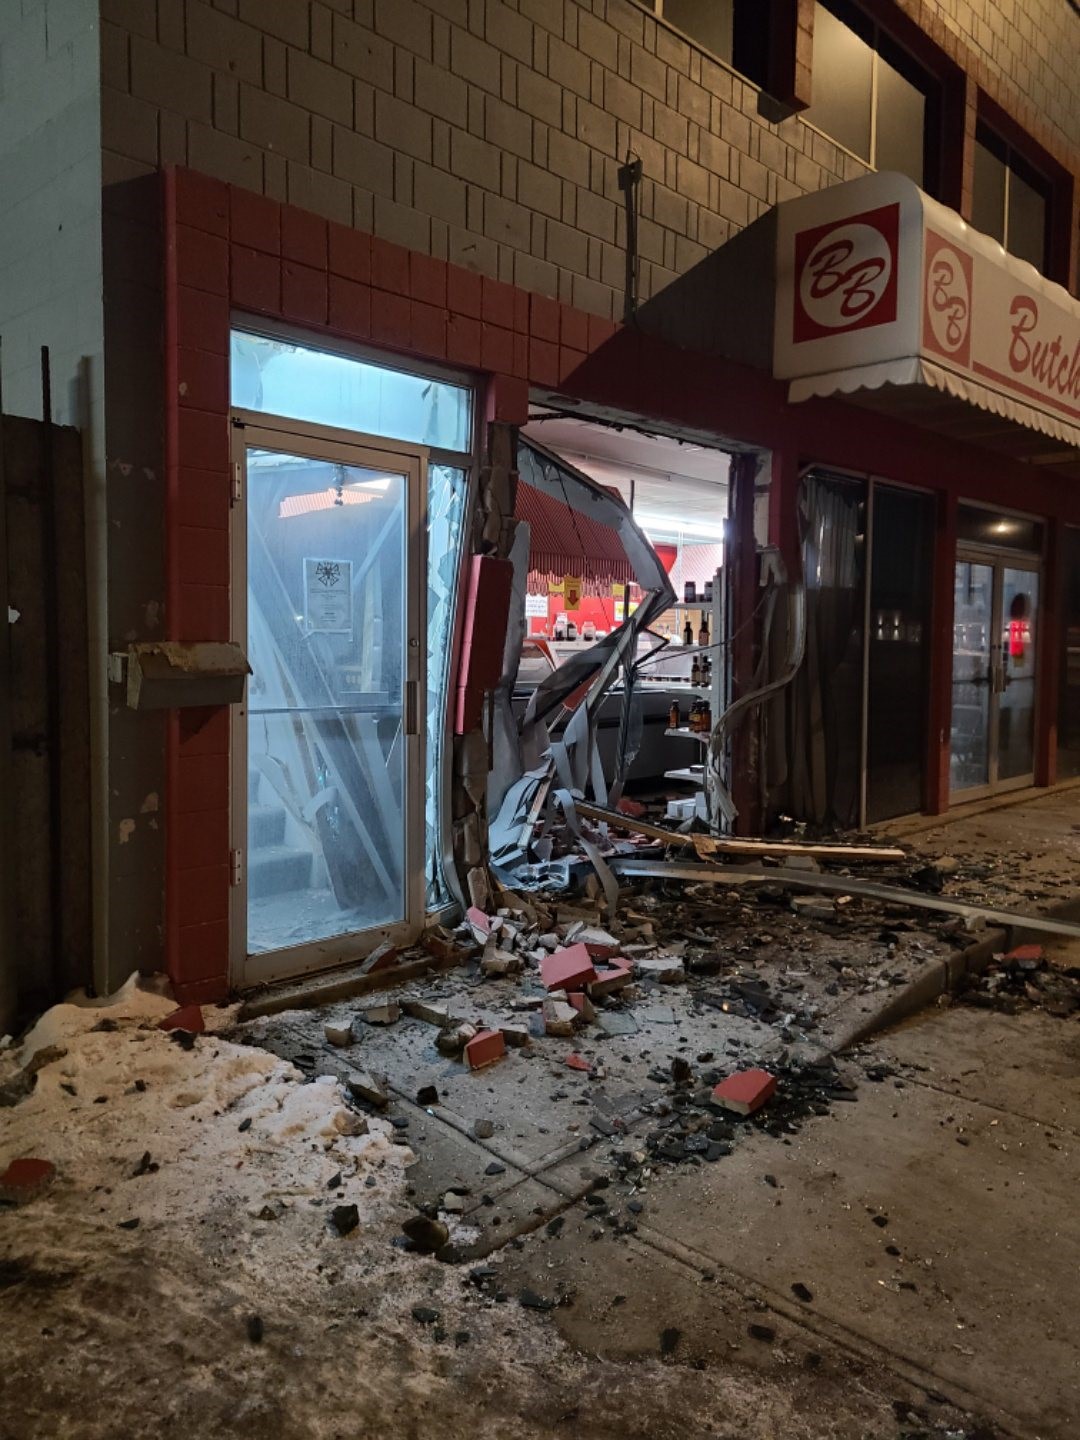 A vehicle crashed into Butcher Boy Meats early Thursday morning prompting an investigation from RPS.